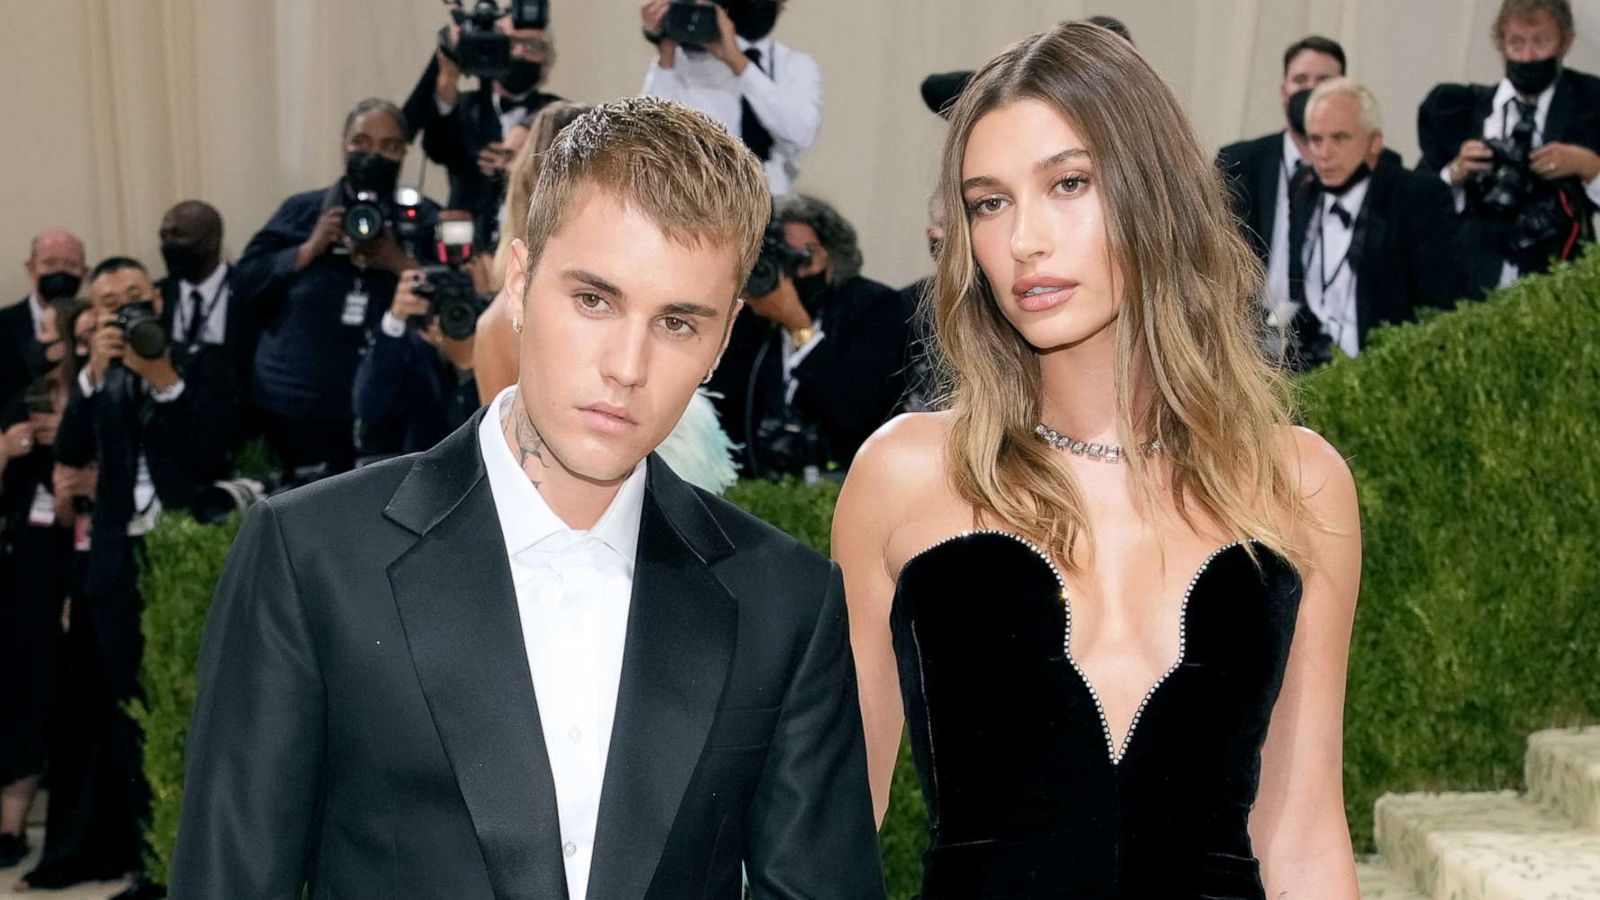 PHOTO: Justin Bieber and Hailey Bieber attend The 2021 Met Gala Celebrating In America: A Lexicon Of Fashion at Metropolitan Museum of Art, Sept. 13, 2021, in New York City.